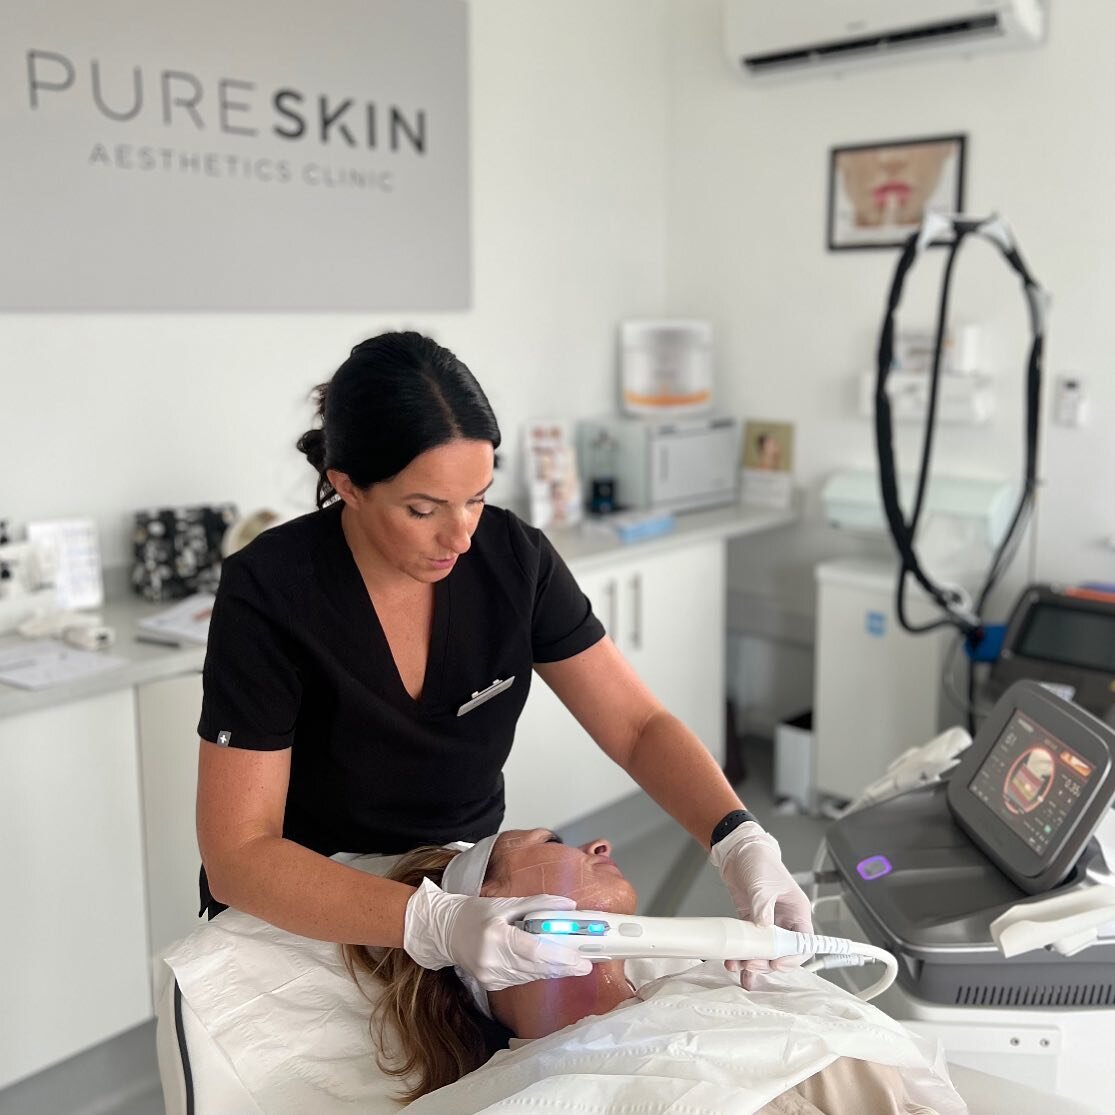 HIFU -Non Surgical Facelift in full action. This treatment with the Focus Dual (Lynton) is a pain free treatment, you may feel a warming sensation while the treatment is working, there is no downtime so this literally is the lunchtime Facial. Great R